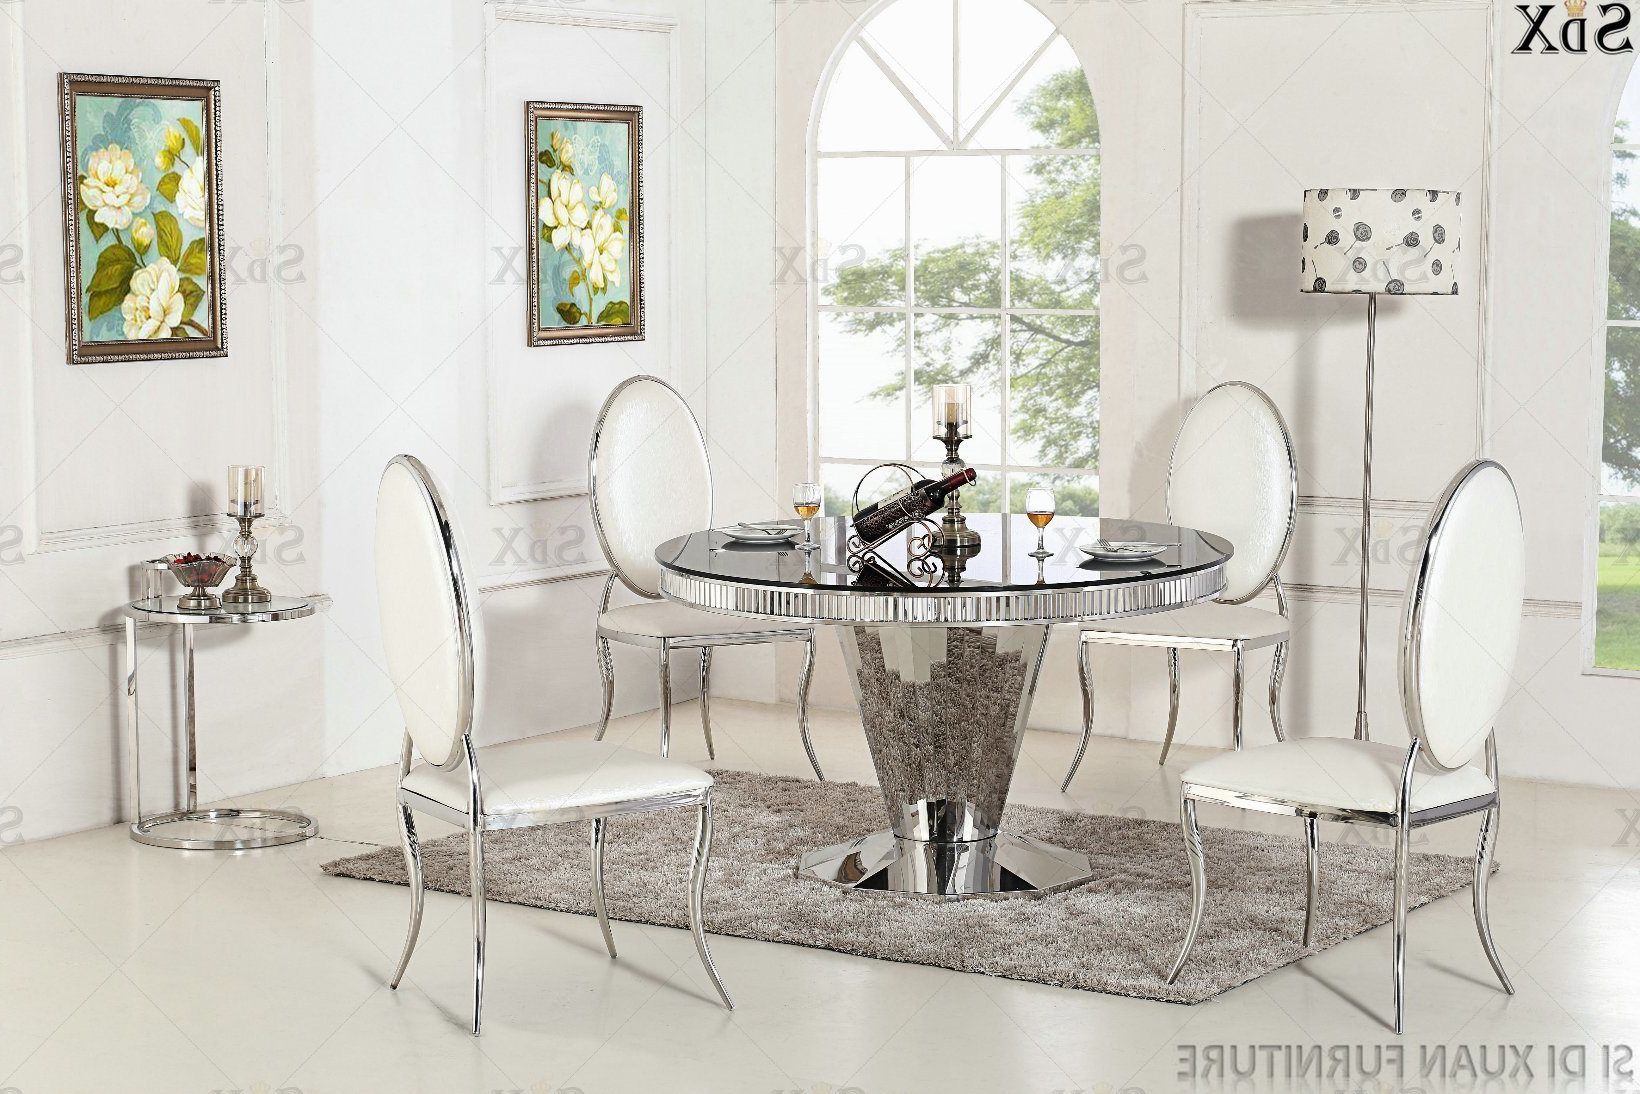 [%[hot Item] Modern Round Home Stainless Steel Glass Top Furniture Dining  Room Table With Well Known Modern Round Glass Top Dining Tables|modern Round Glass Top Dining Tables Pertaining To Well Known [hot Item] Modern Round Home Stainless Steel Glass Top Furniture Dining  Room Table|most Current Modern Round Glass Top Dining Tables In [hot Item] Modern Round Home Stainless Steel Glass Top Furniture Dining  Room Table|famous [hot Item] Modern Round Home Stainless Steel Glass Top Furniture Dining  Room Table With Modern Round Glass Top Dining Tables%] (View 24 of 25)